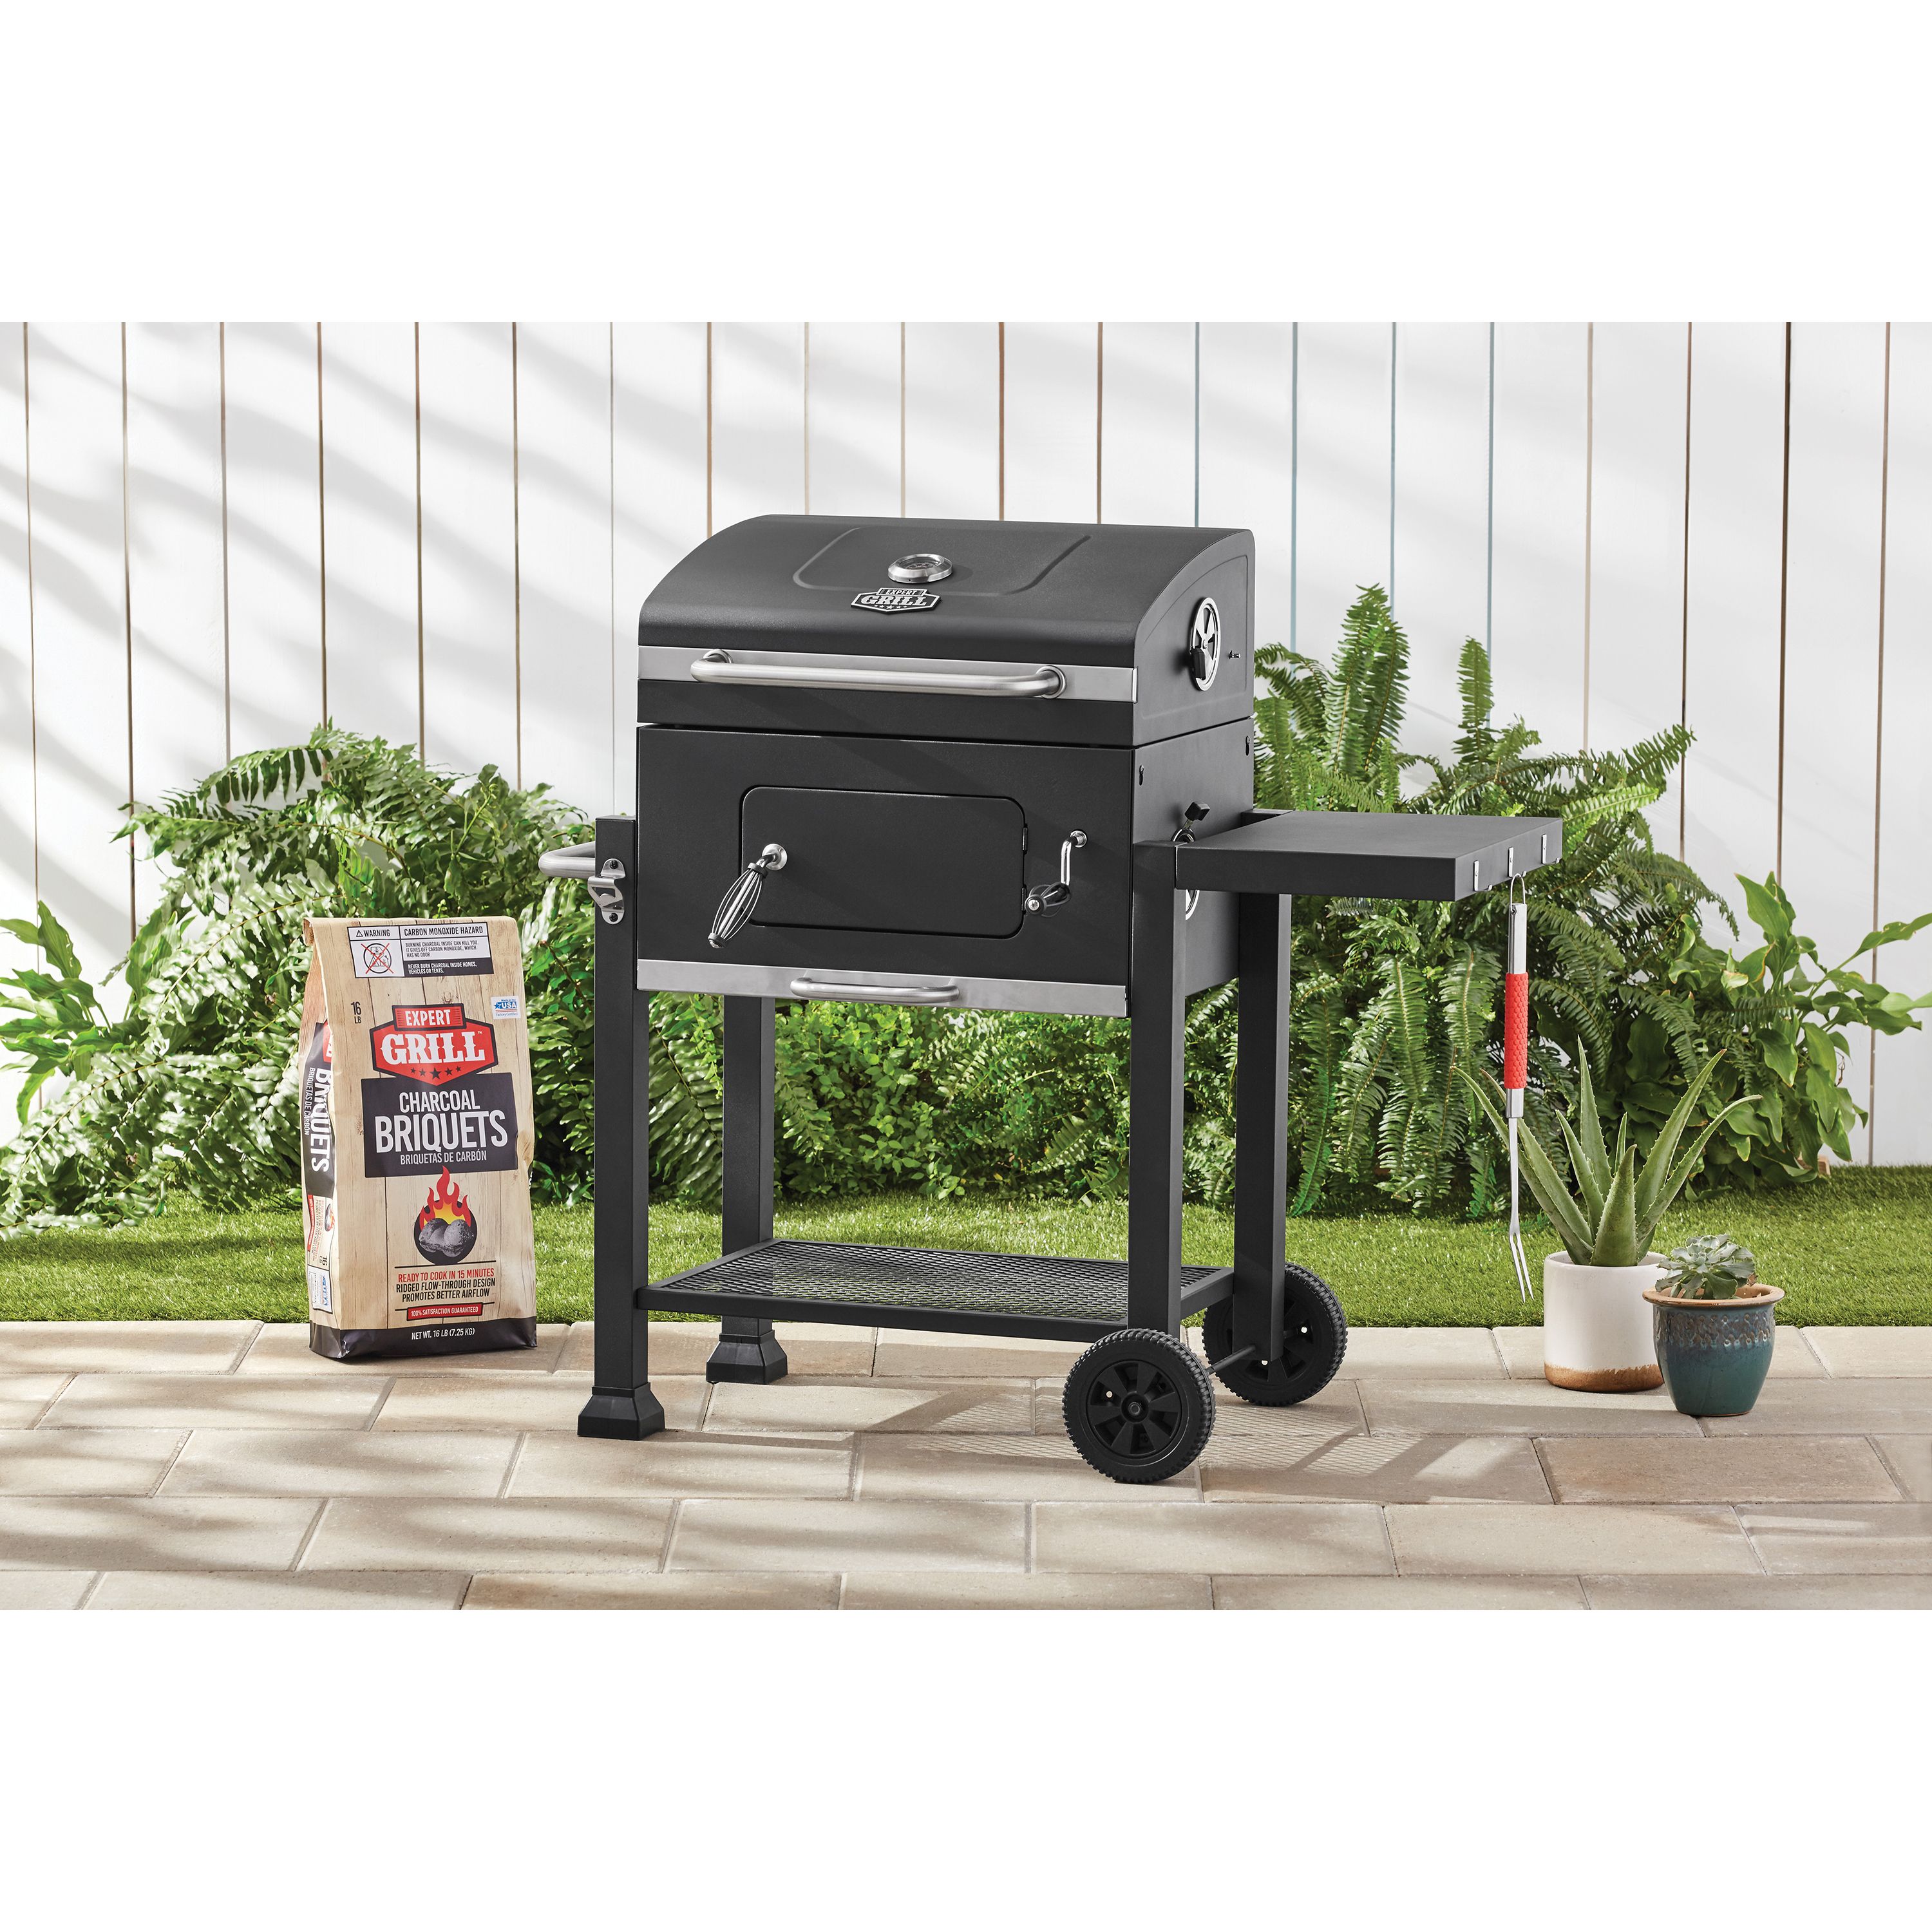 Expert Grill Heavy Duty 24-inch Charcoal Grill, Black - image 3 of 12